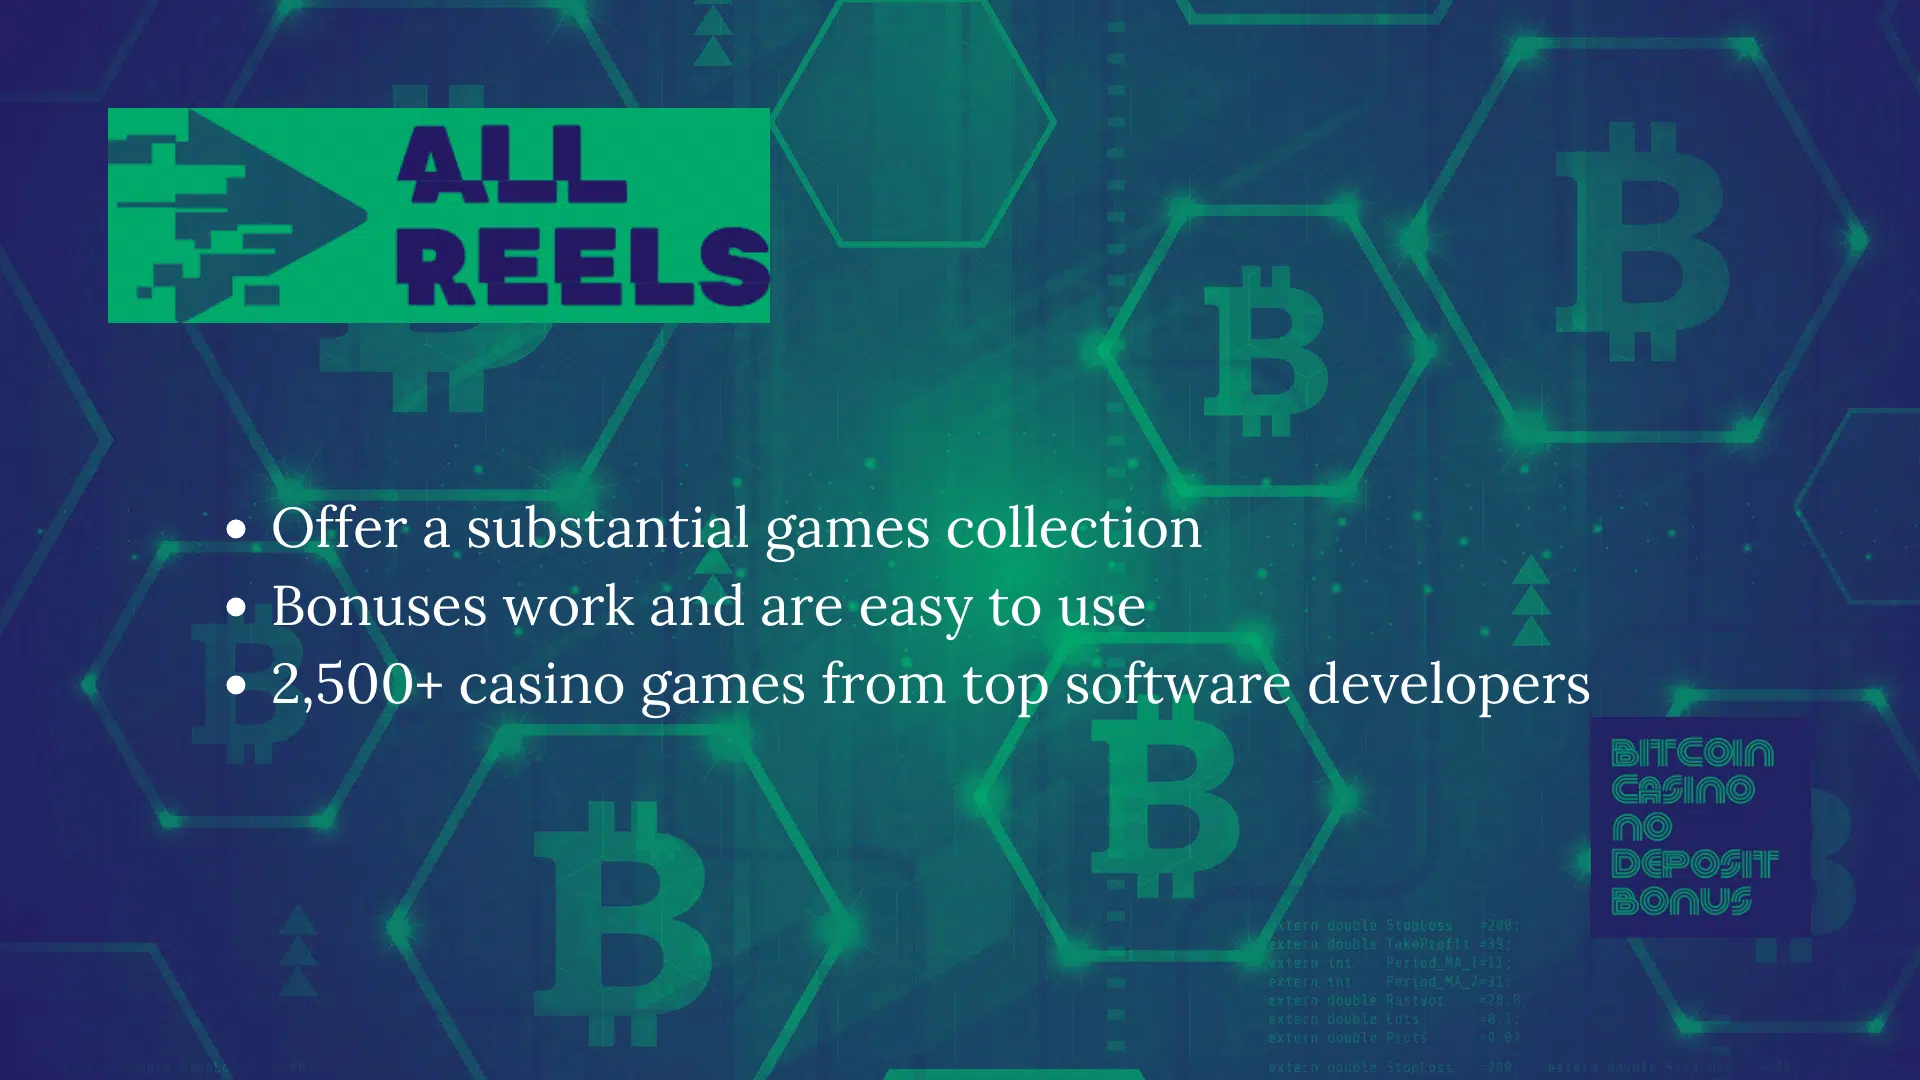 You are currently viewing All Reels Casino Bonuses Codes – AllReels.com Free Spins December 2022